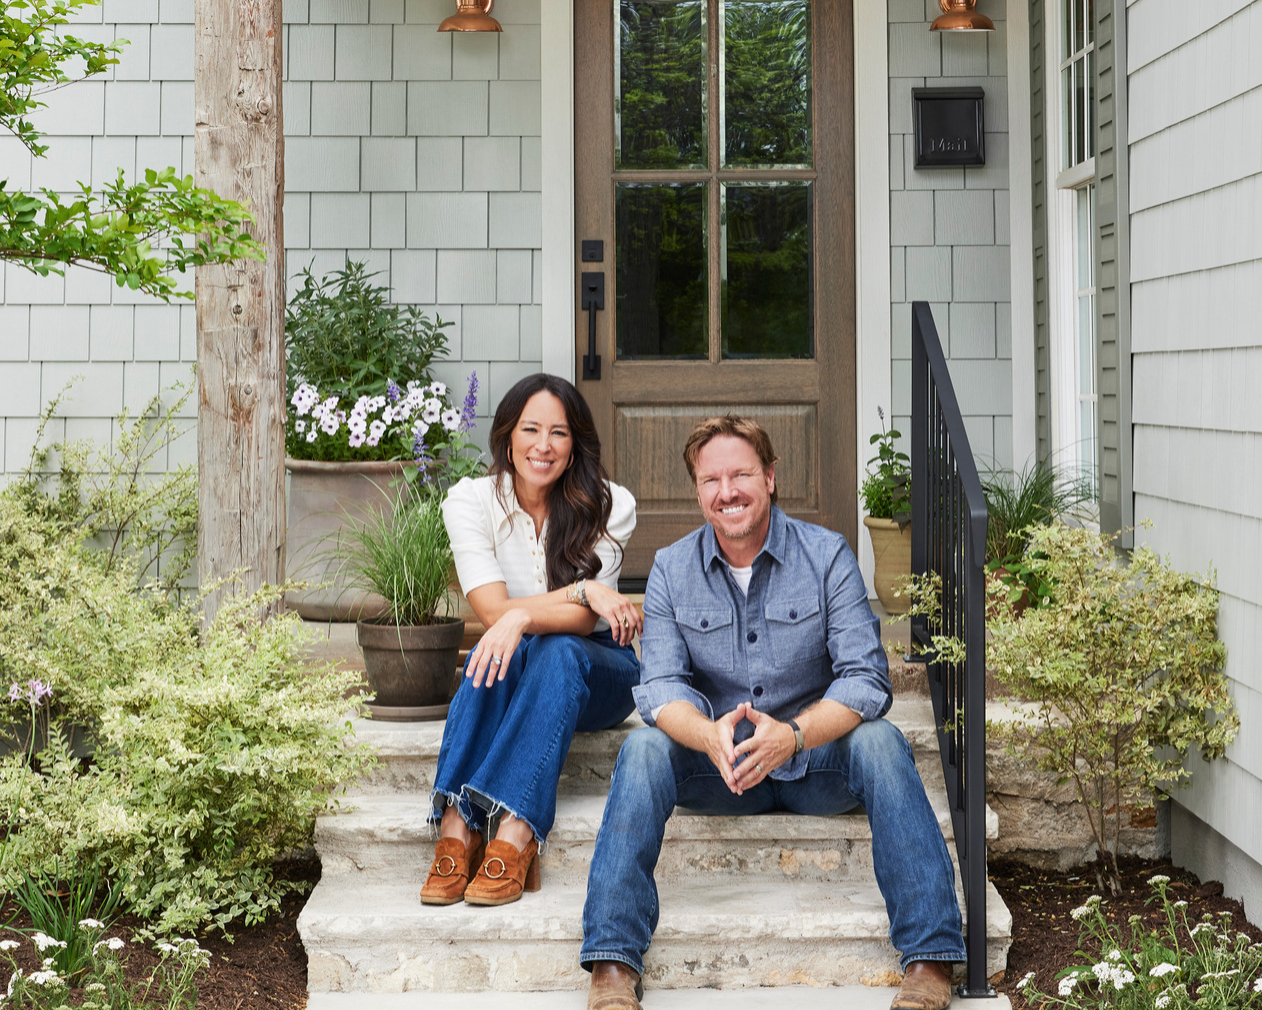 Chip and Joanna Gaines James Hardie Siding Magnolia Collaboration